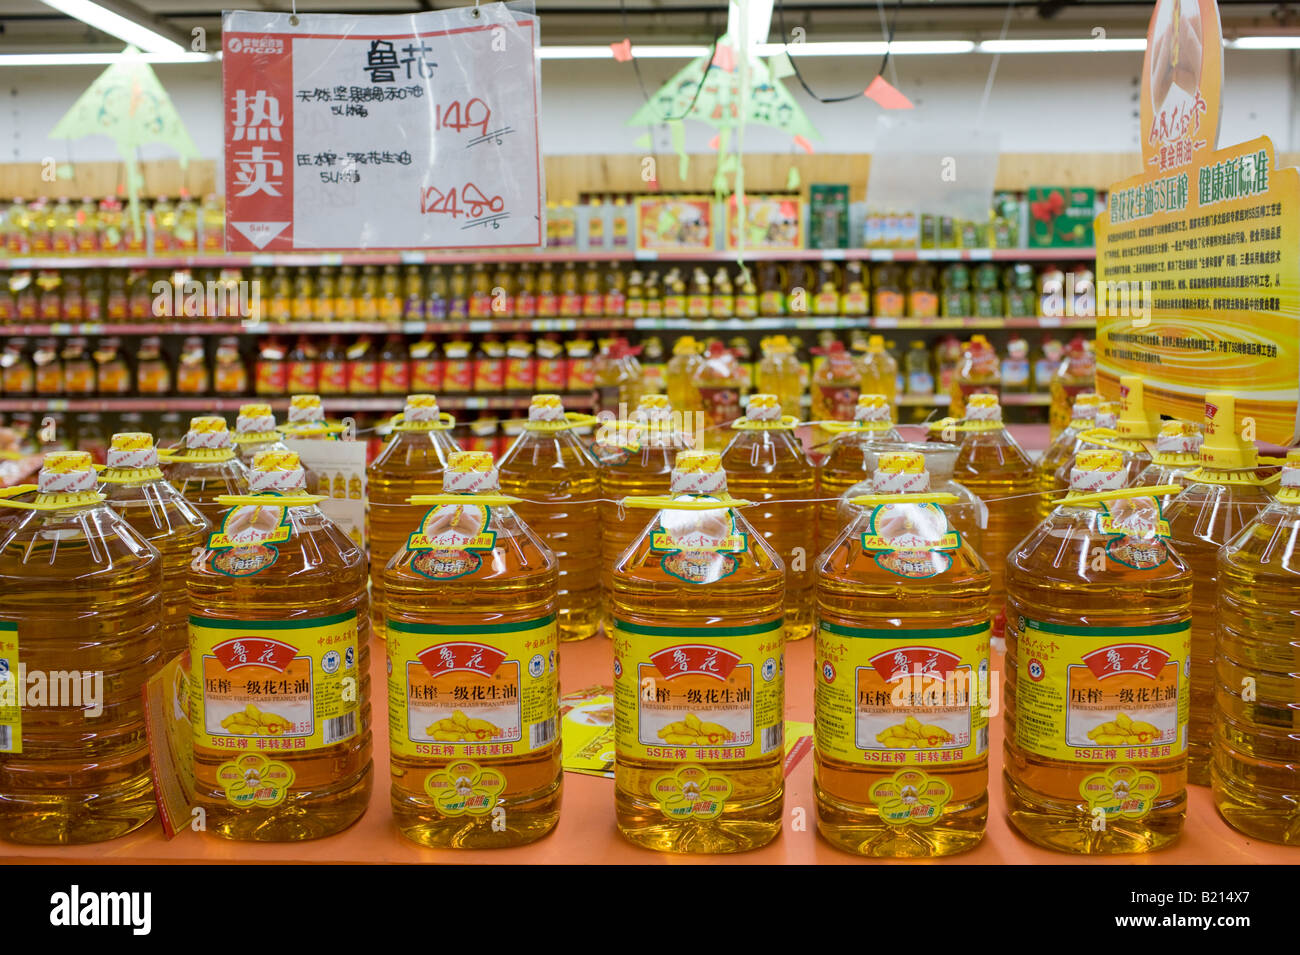 Peanut cooking oil in supermarket Chongqing China The Chinese use a lot of edible oil and find it expensive Stock Photo